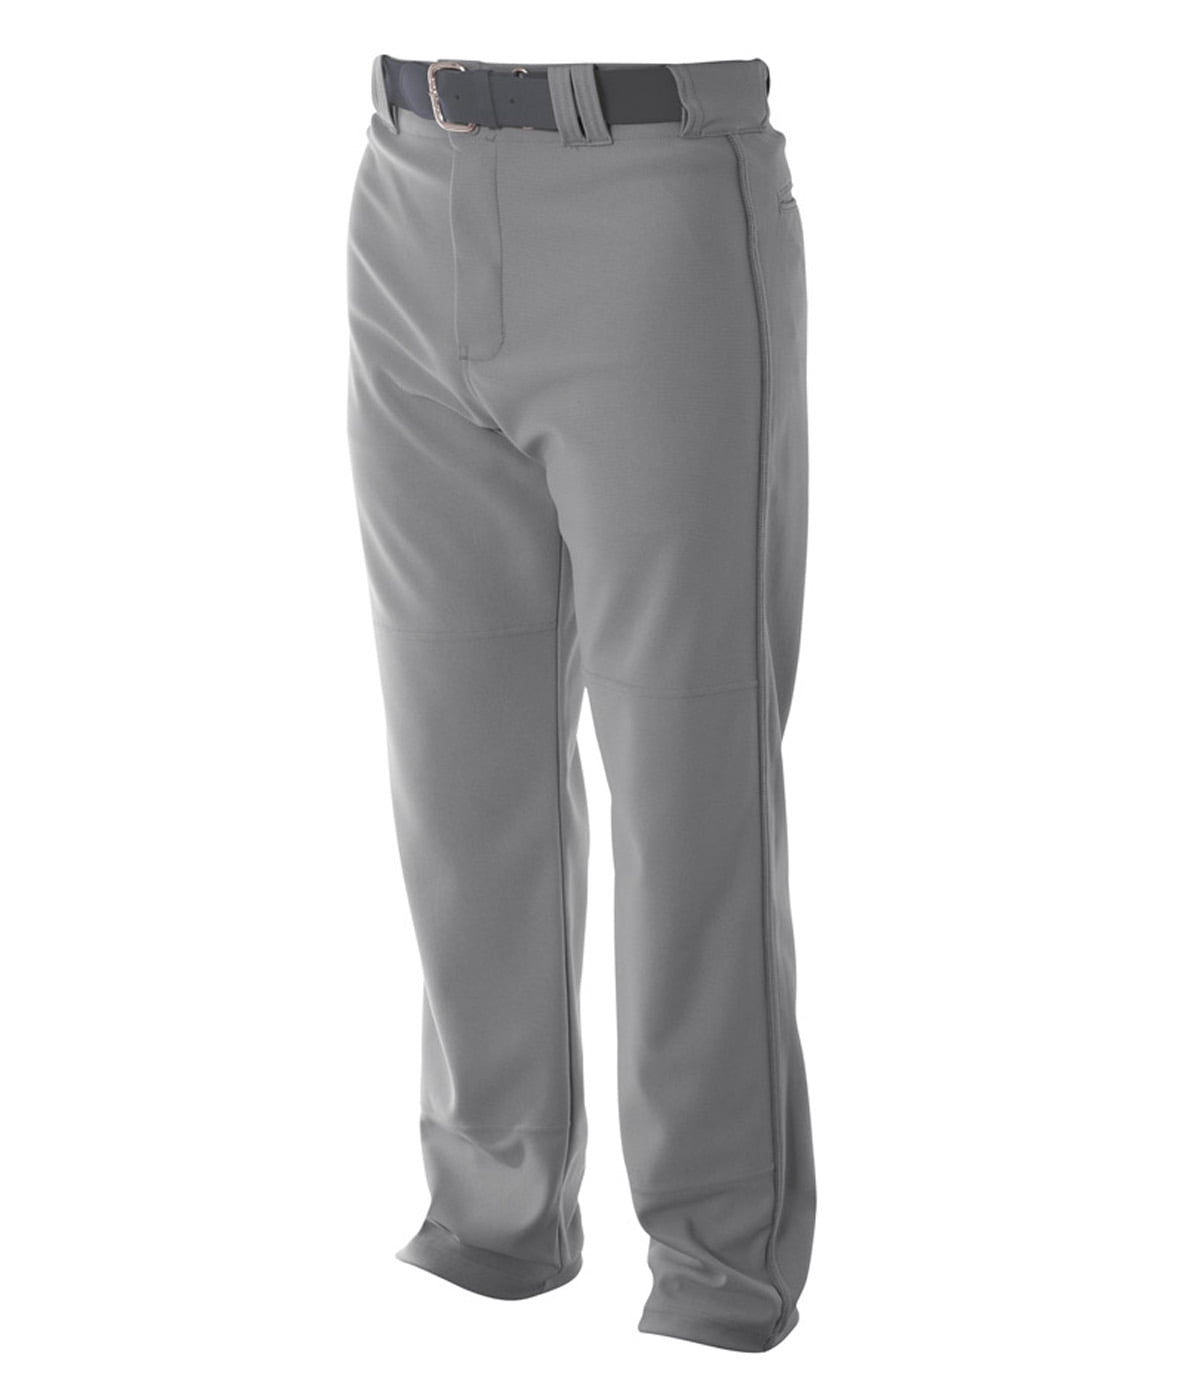 Under Armour Baseball Pant Pro Style Open Bottom Gray White Navy Pipe Men Youth 